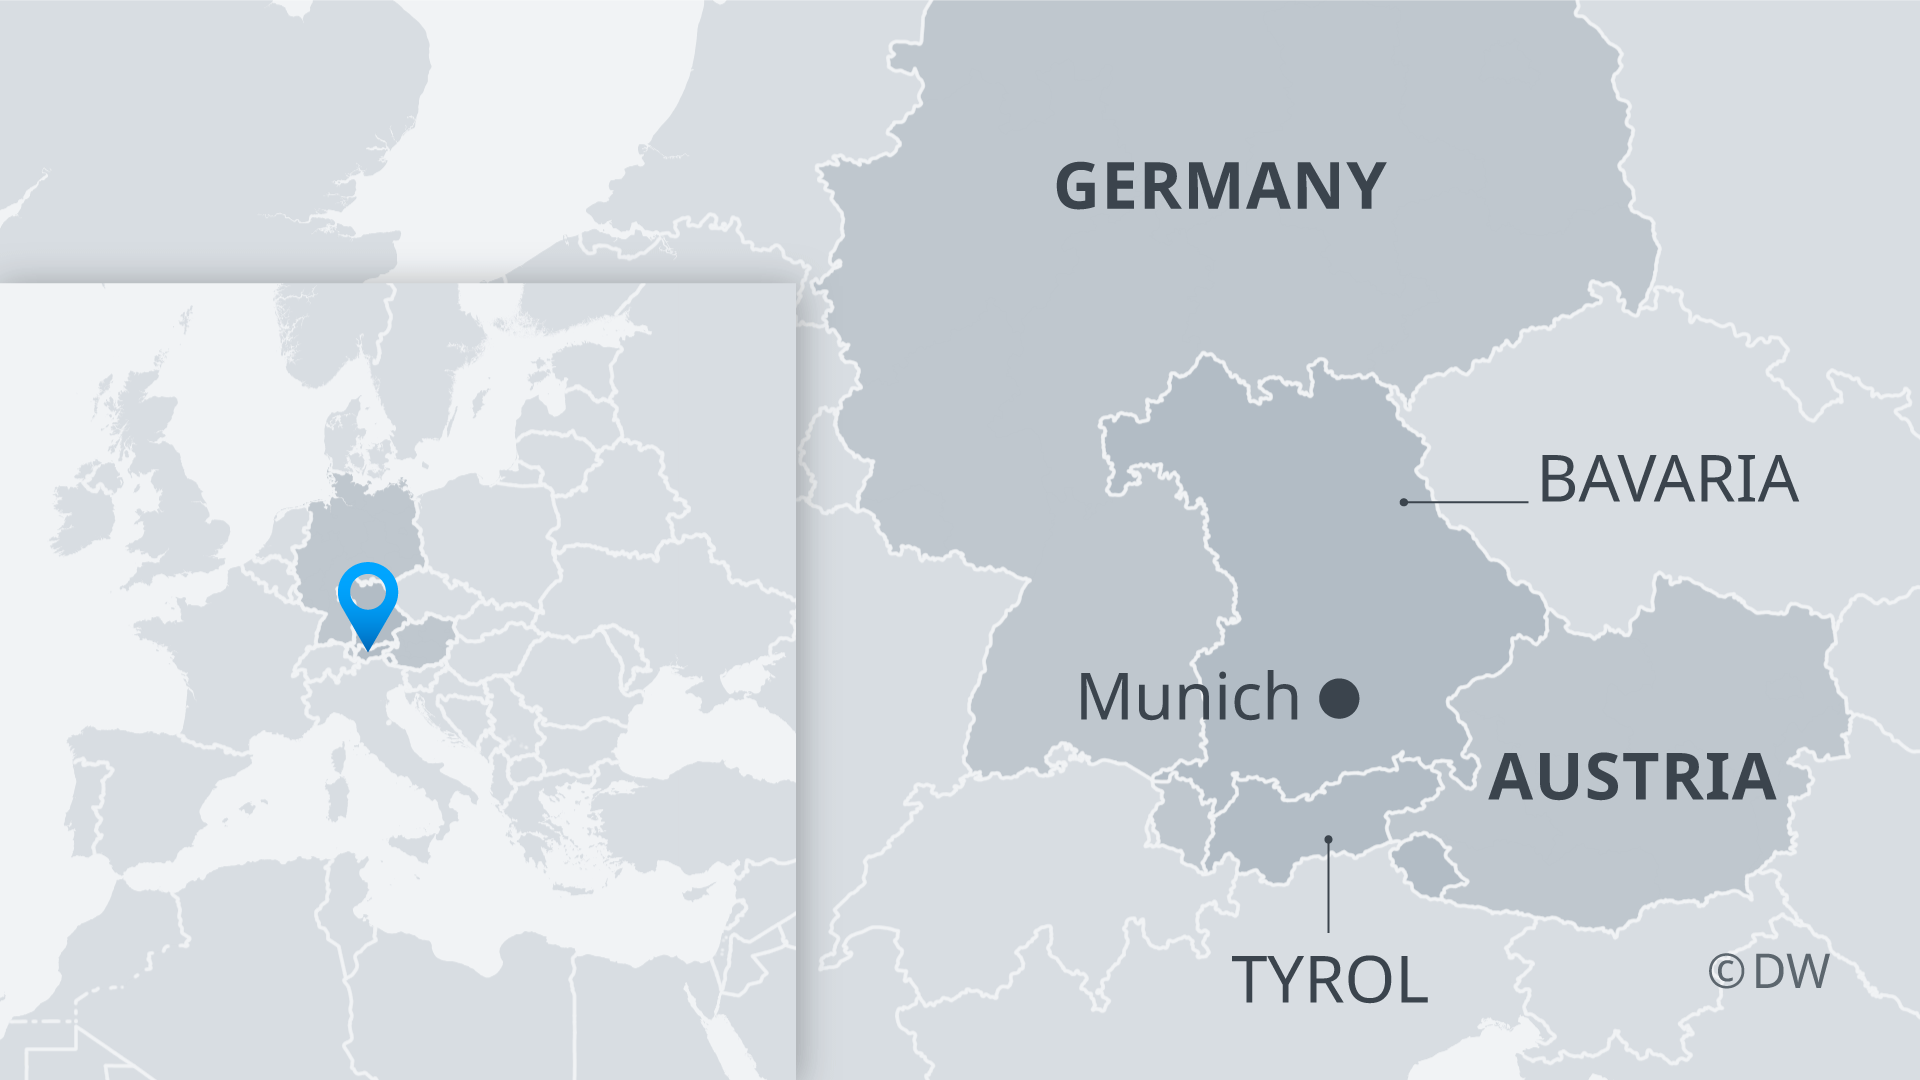 map of germany and austria Austria Closes Country Roads To German Travelers News Dw map of germany and austria